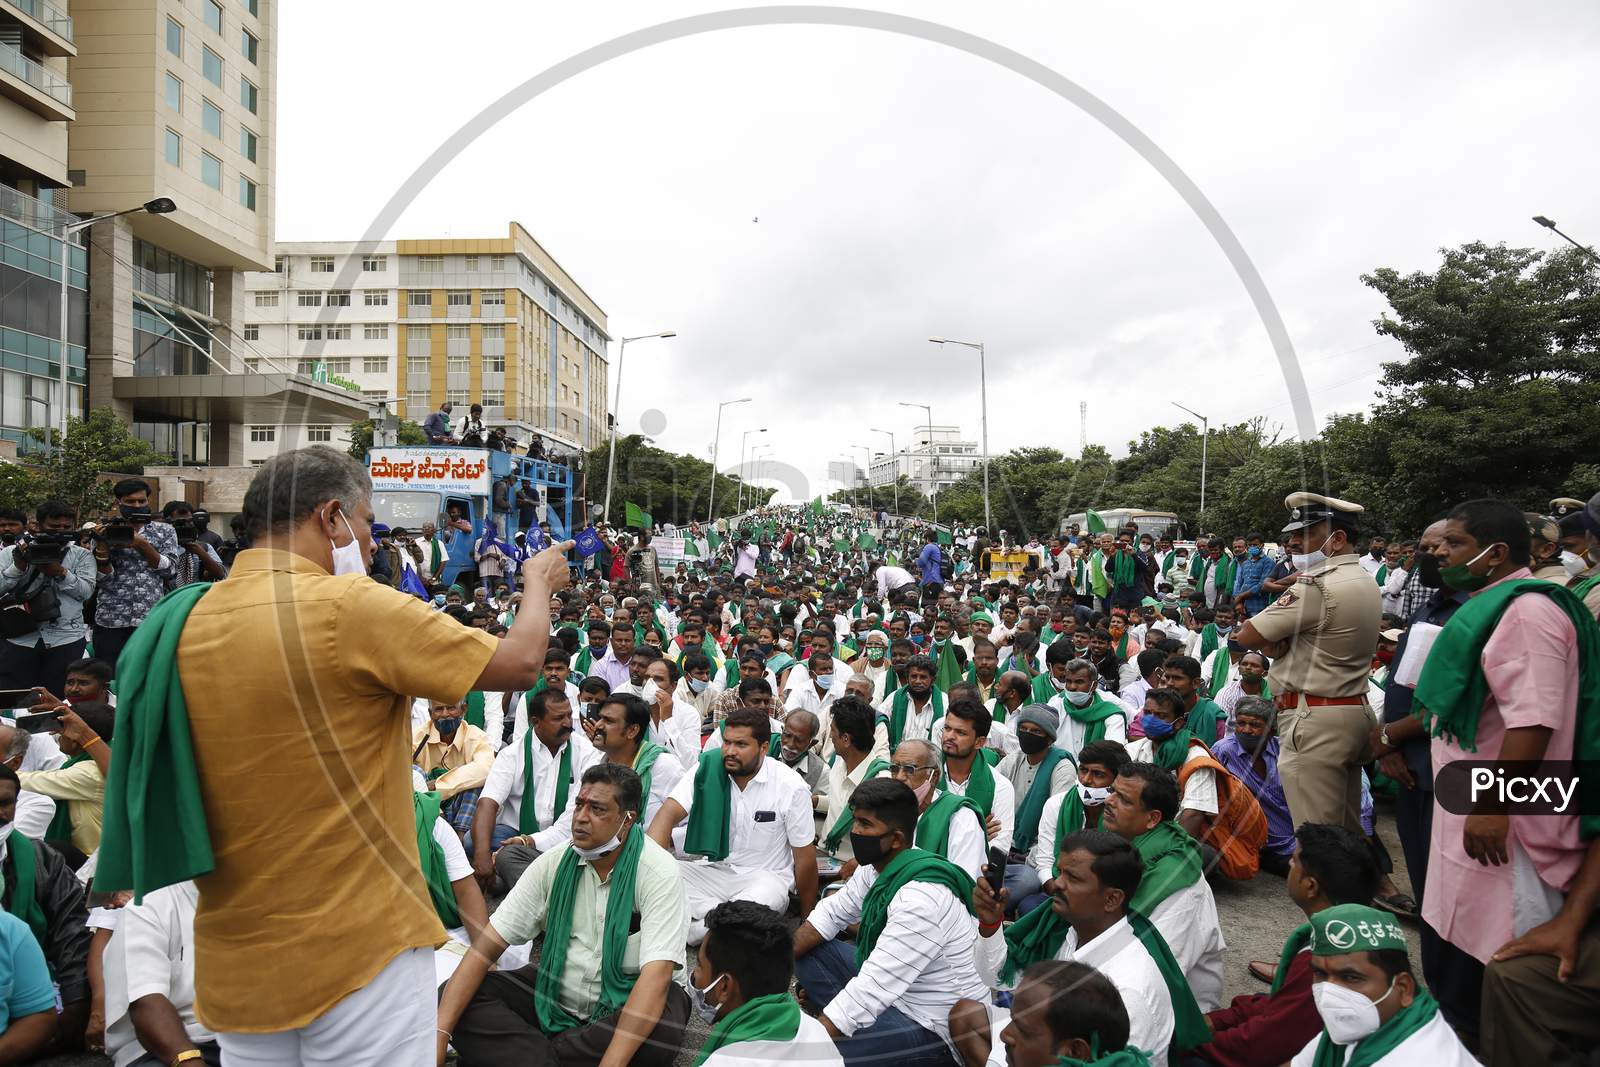 Farmers block a road as they listen to a party leader during a protest against the passage of two controversial farm bills by the country’s parliament in Bangalore, India.